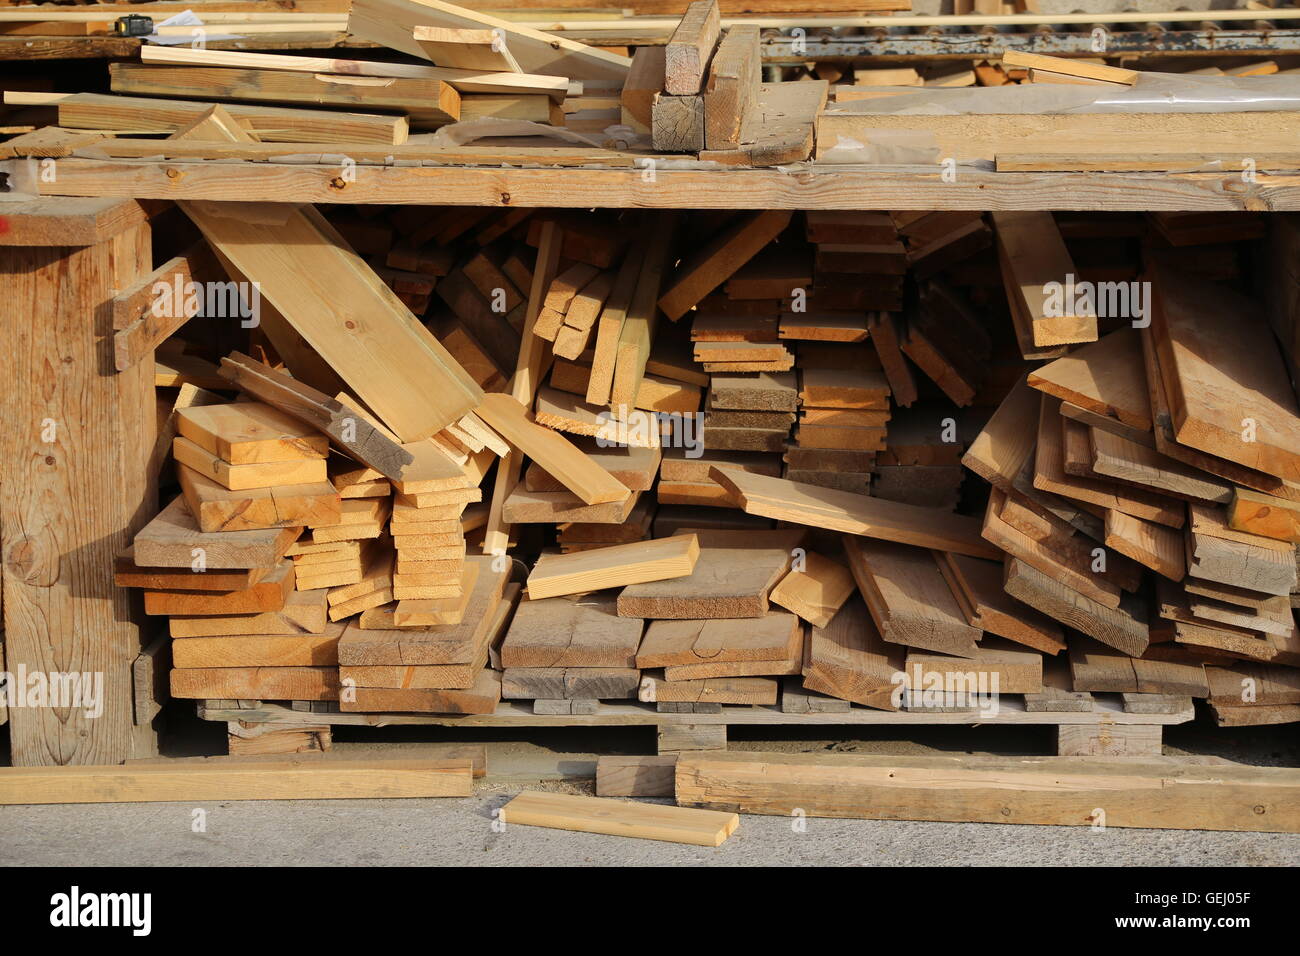 Lumber. Carpentry table full of rough planks, lumber pieces. New lumbers, construction Lumbers, wood planks, raw planks Construction material. Stock Photo